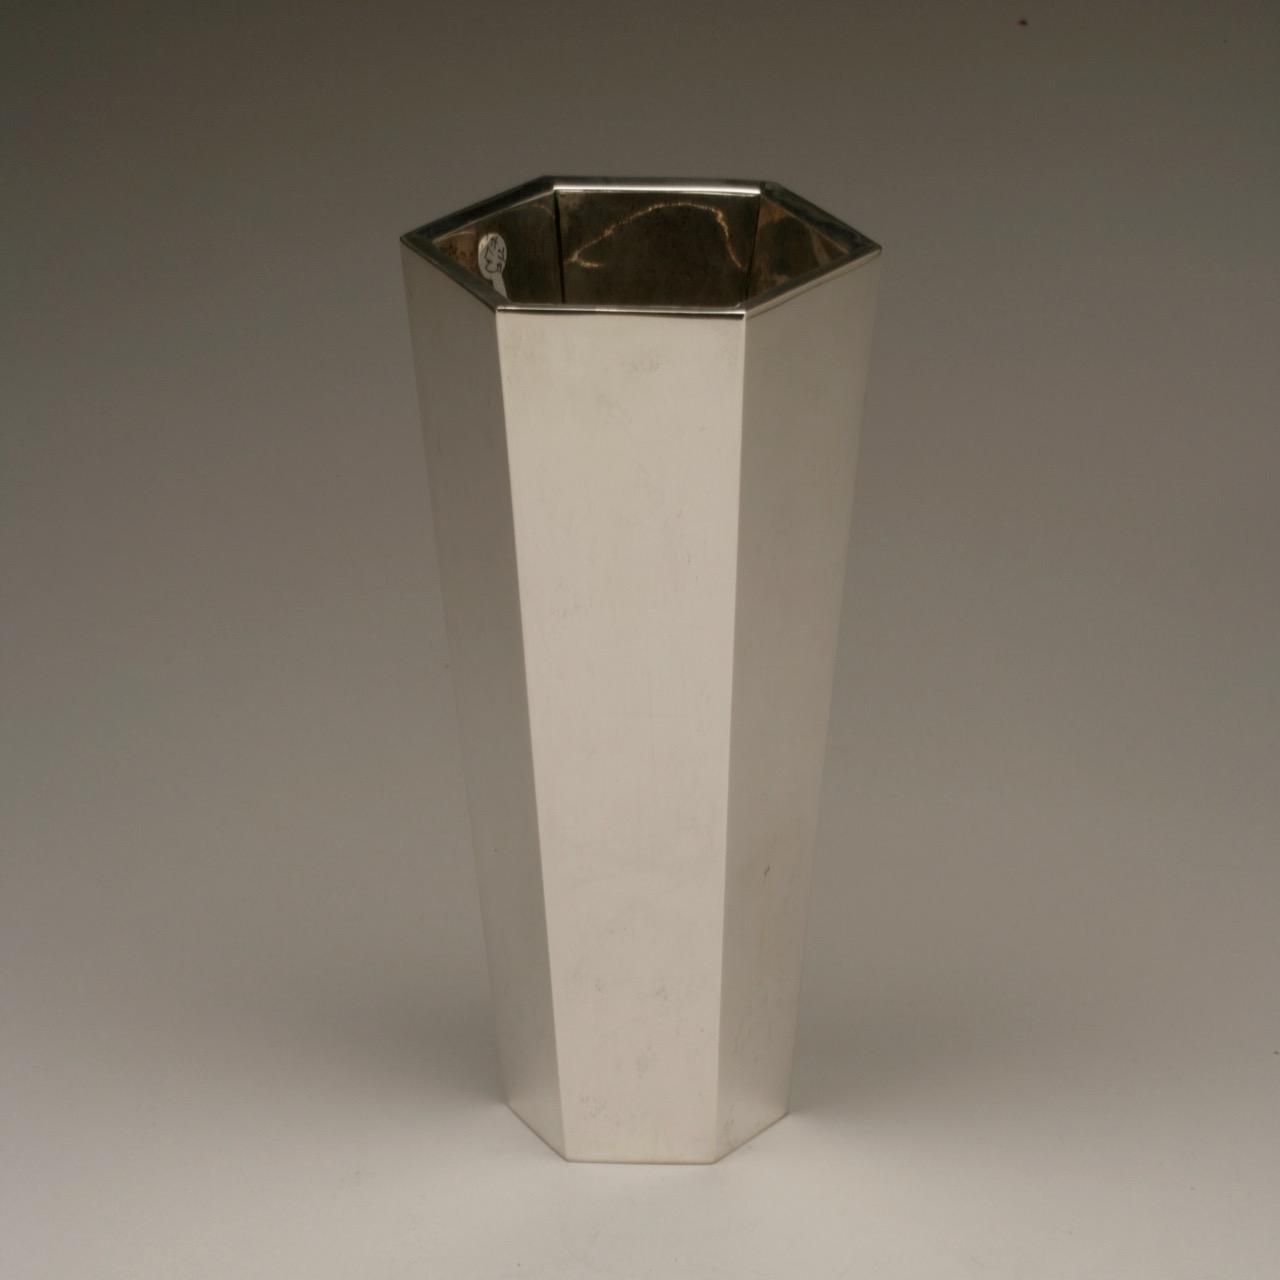 Frank Lloyd wright designed sterling silver vase by Tiffany. 

Made in Italy as a special order for Tiffany from designs by Frank Lloyd Wright. Exceptionally heavy piece for the size.

Designer: Frank Lloyd Wright

Maker: Tiffany

circa